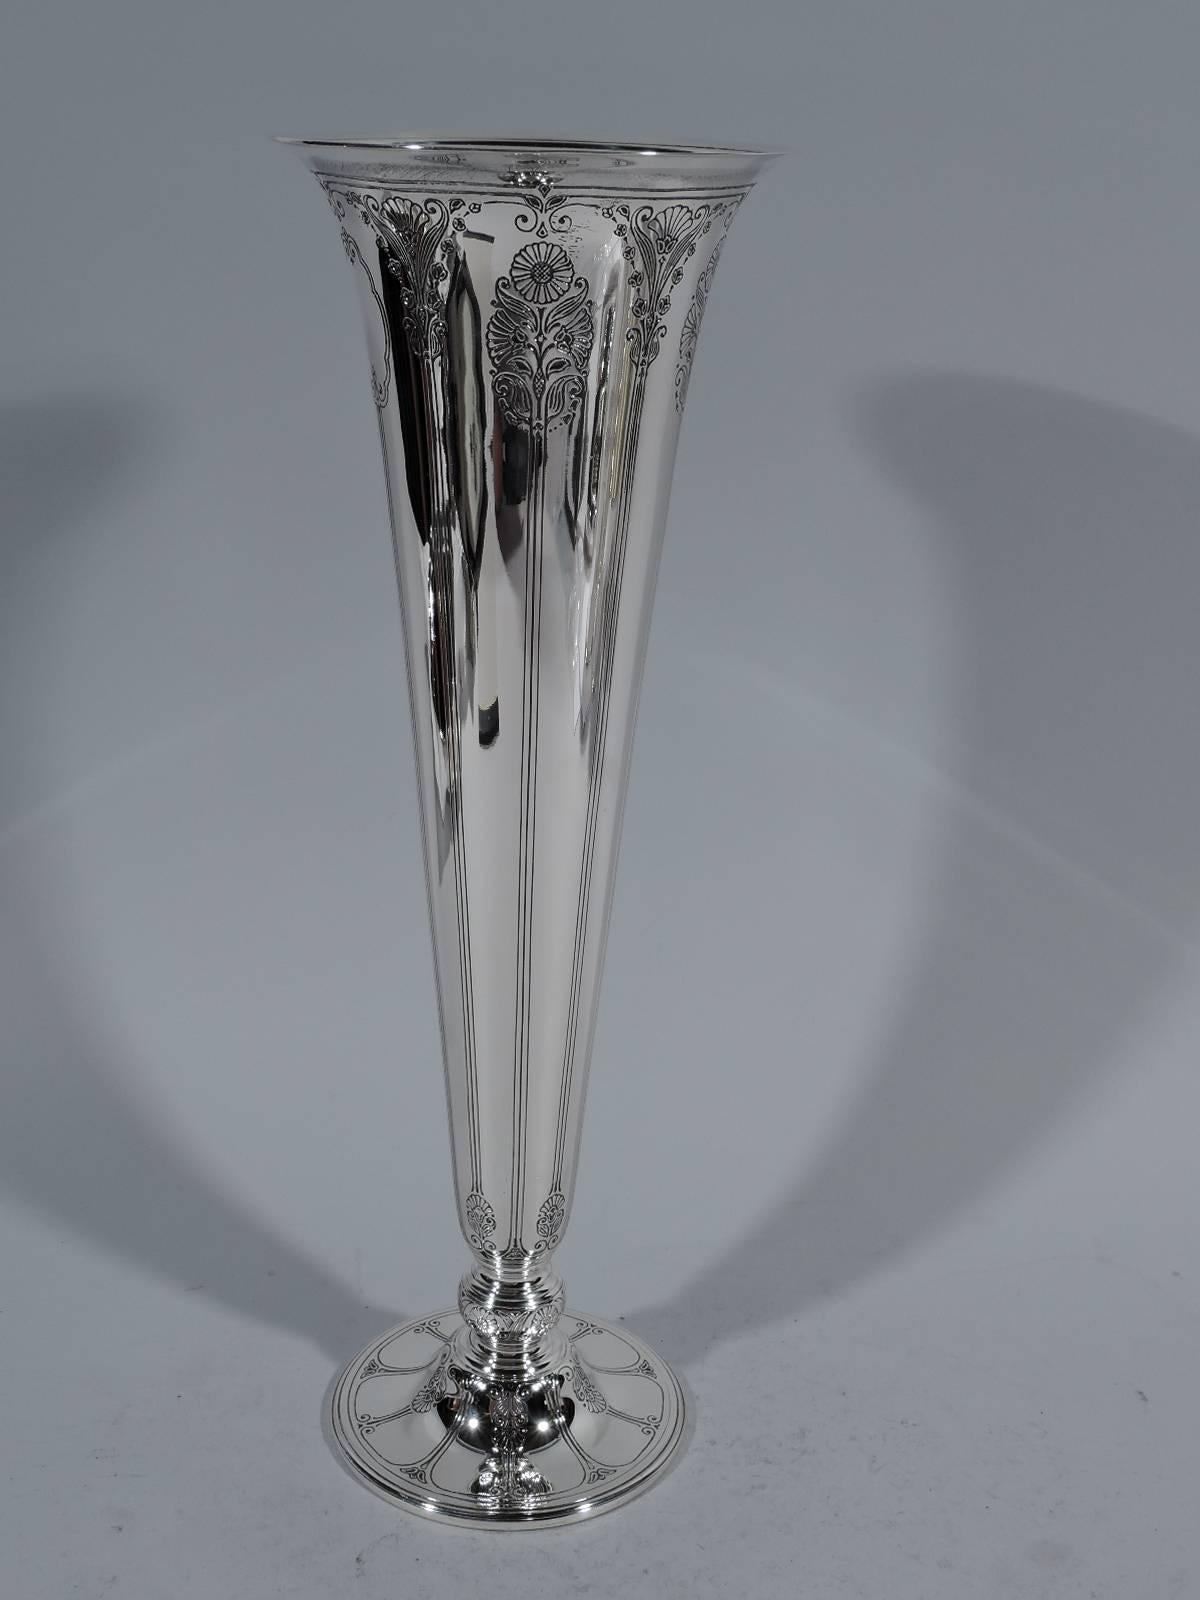 Art Deco sterling silver trumpet vase. Made by Tiffany & Co. in New York, circa 1921. Tapering sides and flared rim on knop on raised circular foot. Elongating vertical ornament: Stylized flowers as well as lines and scrolls. Scalloped frame